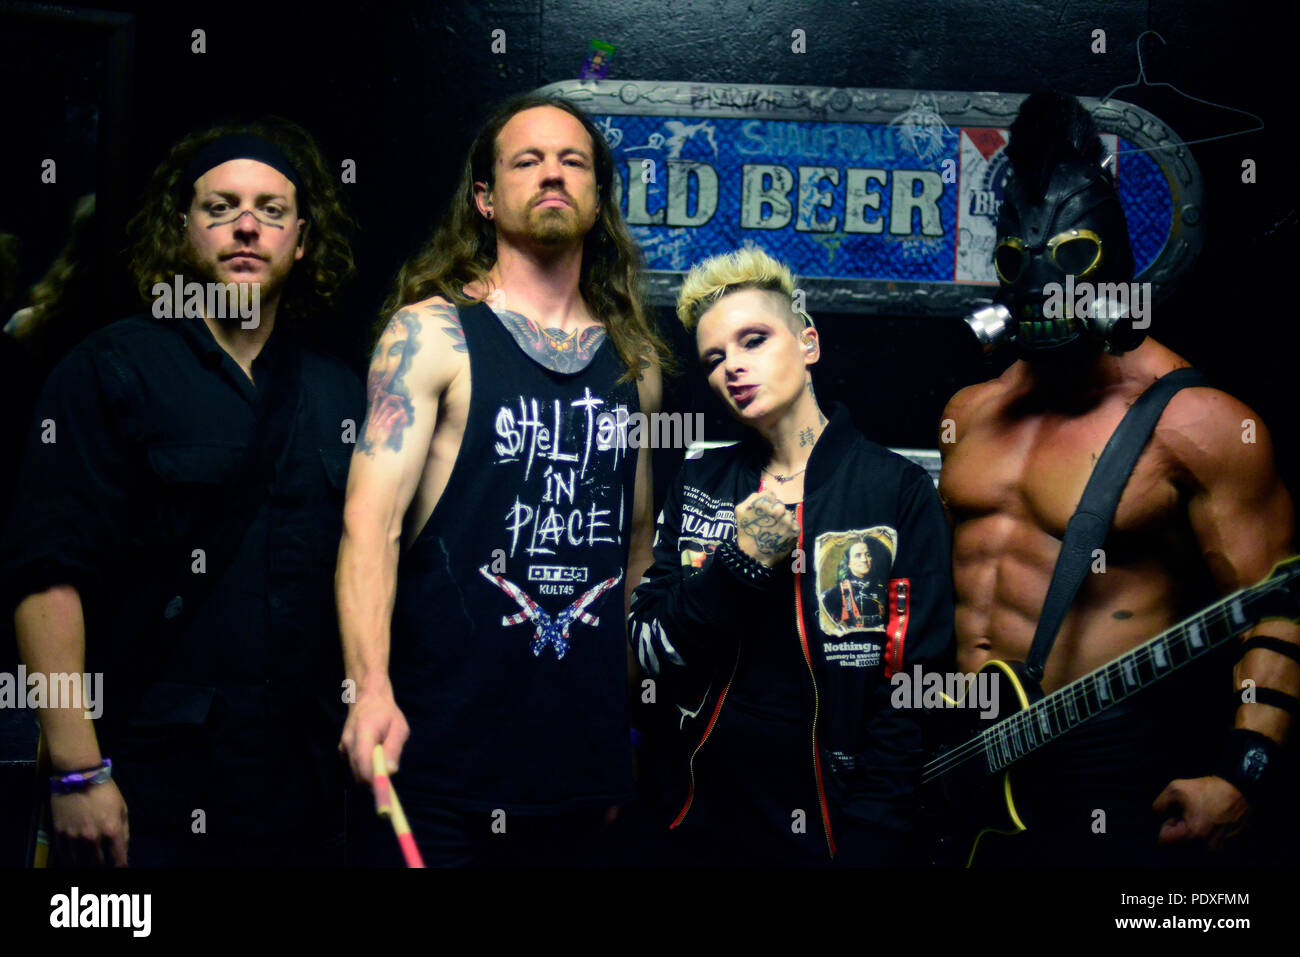 August 8, 2018 - West Hollywood, CA, USA - Musicians -  [left to right]  DREWSKI BARNES bass player, JUSTIN KIER drums, OTEP SHAMAYA lead vocals, and ARISTOTLE-ARI MIHALOPOULOS on guitars for OTEP, back stage at The Whisky A Go Go, West Hollywood, California, USA, August 8, 2018. OTEP is a Los Angeles based heavy metal band that integrates rap metal, new metal, alternative metal into their sound.  OTEP is an anagram for poet.  Otep Shamaya descibes the bands sound as, ''art house nu-metal.''  ..Image Credit  cr  Scott Mitchell/ZUMA Press (Credit Image: © Scott Mitchell via ZUMA Wire) Stock Photo